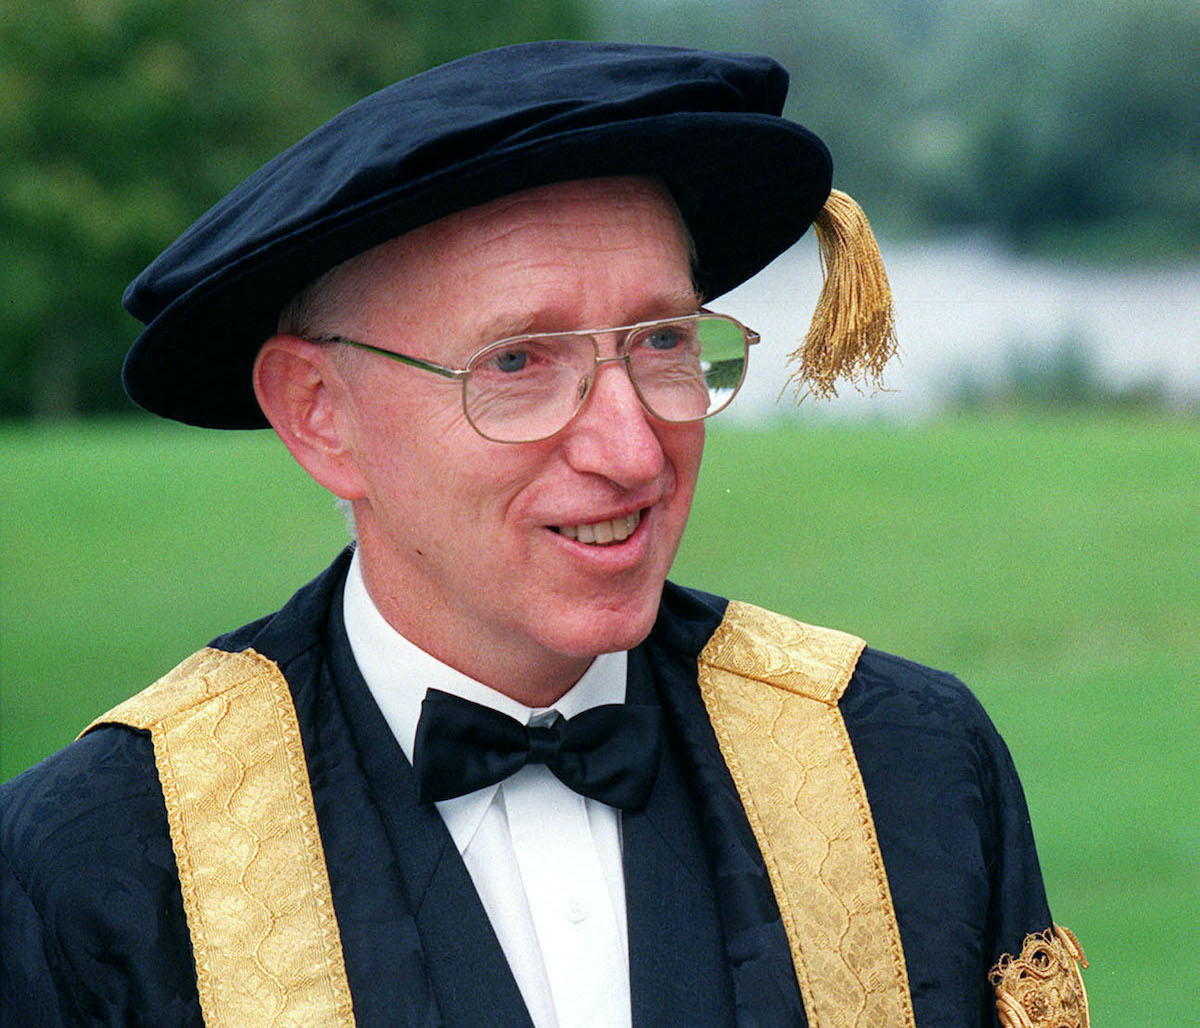 Professor Roger Downer held the positions of President and Vice Chancellor at University of Limerick from 1998 to 2006